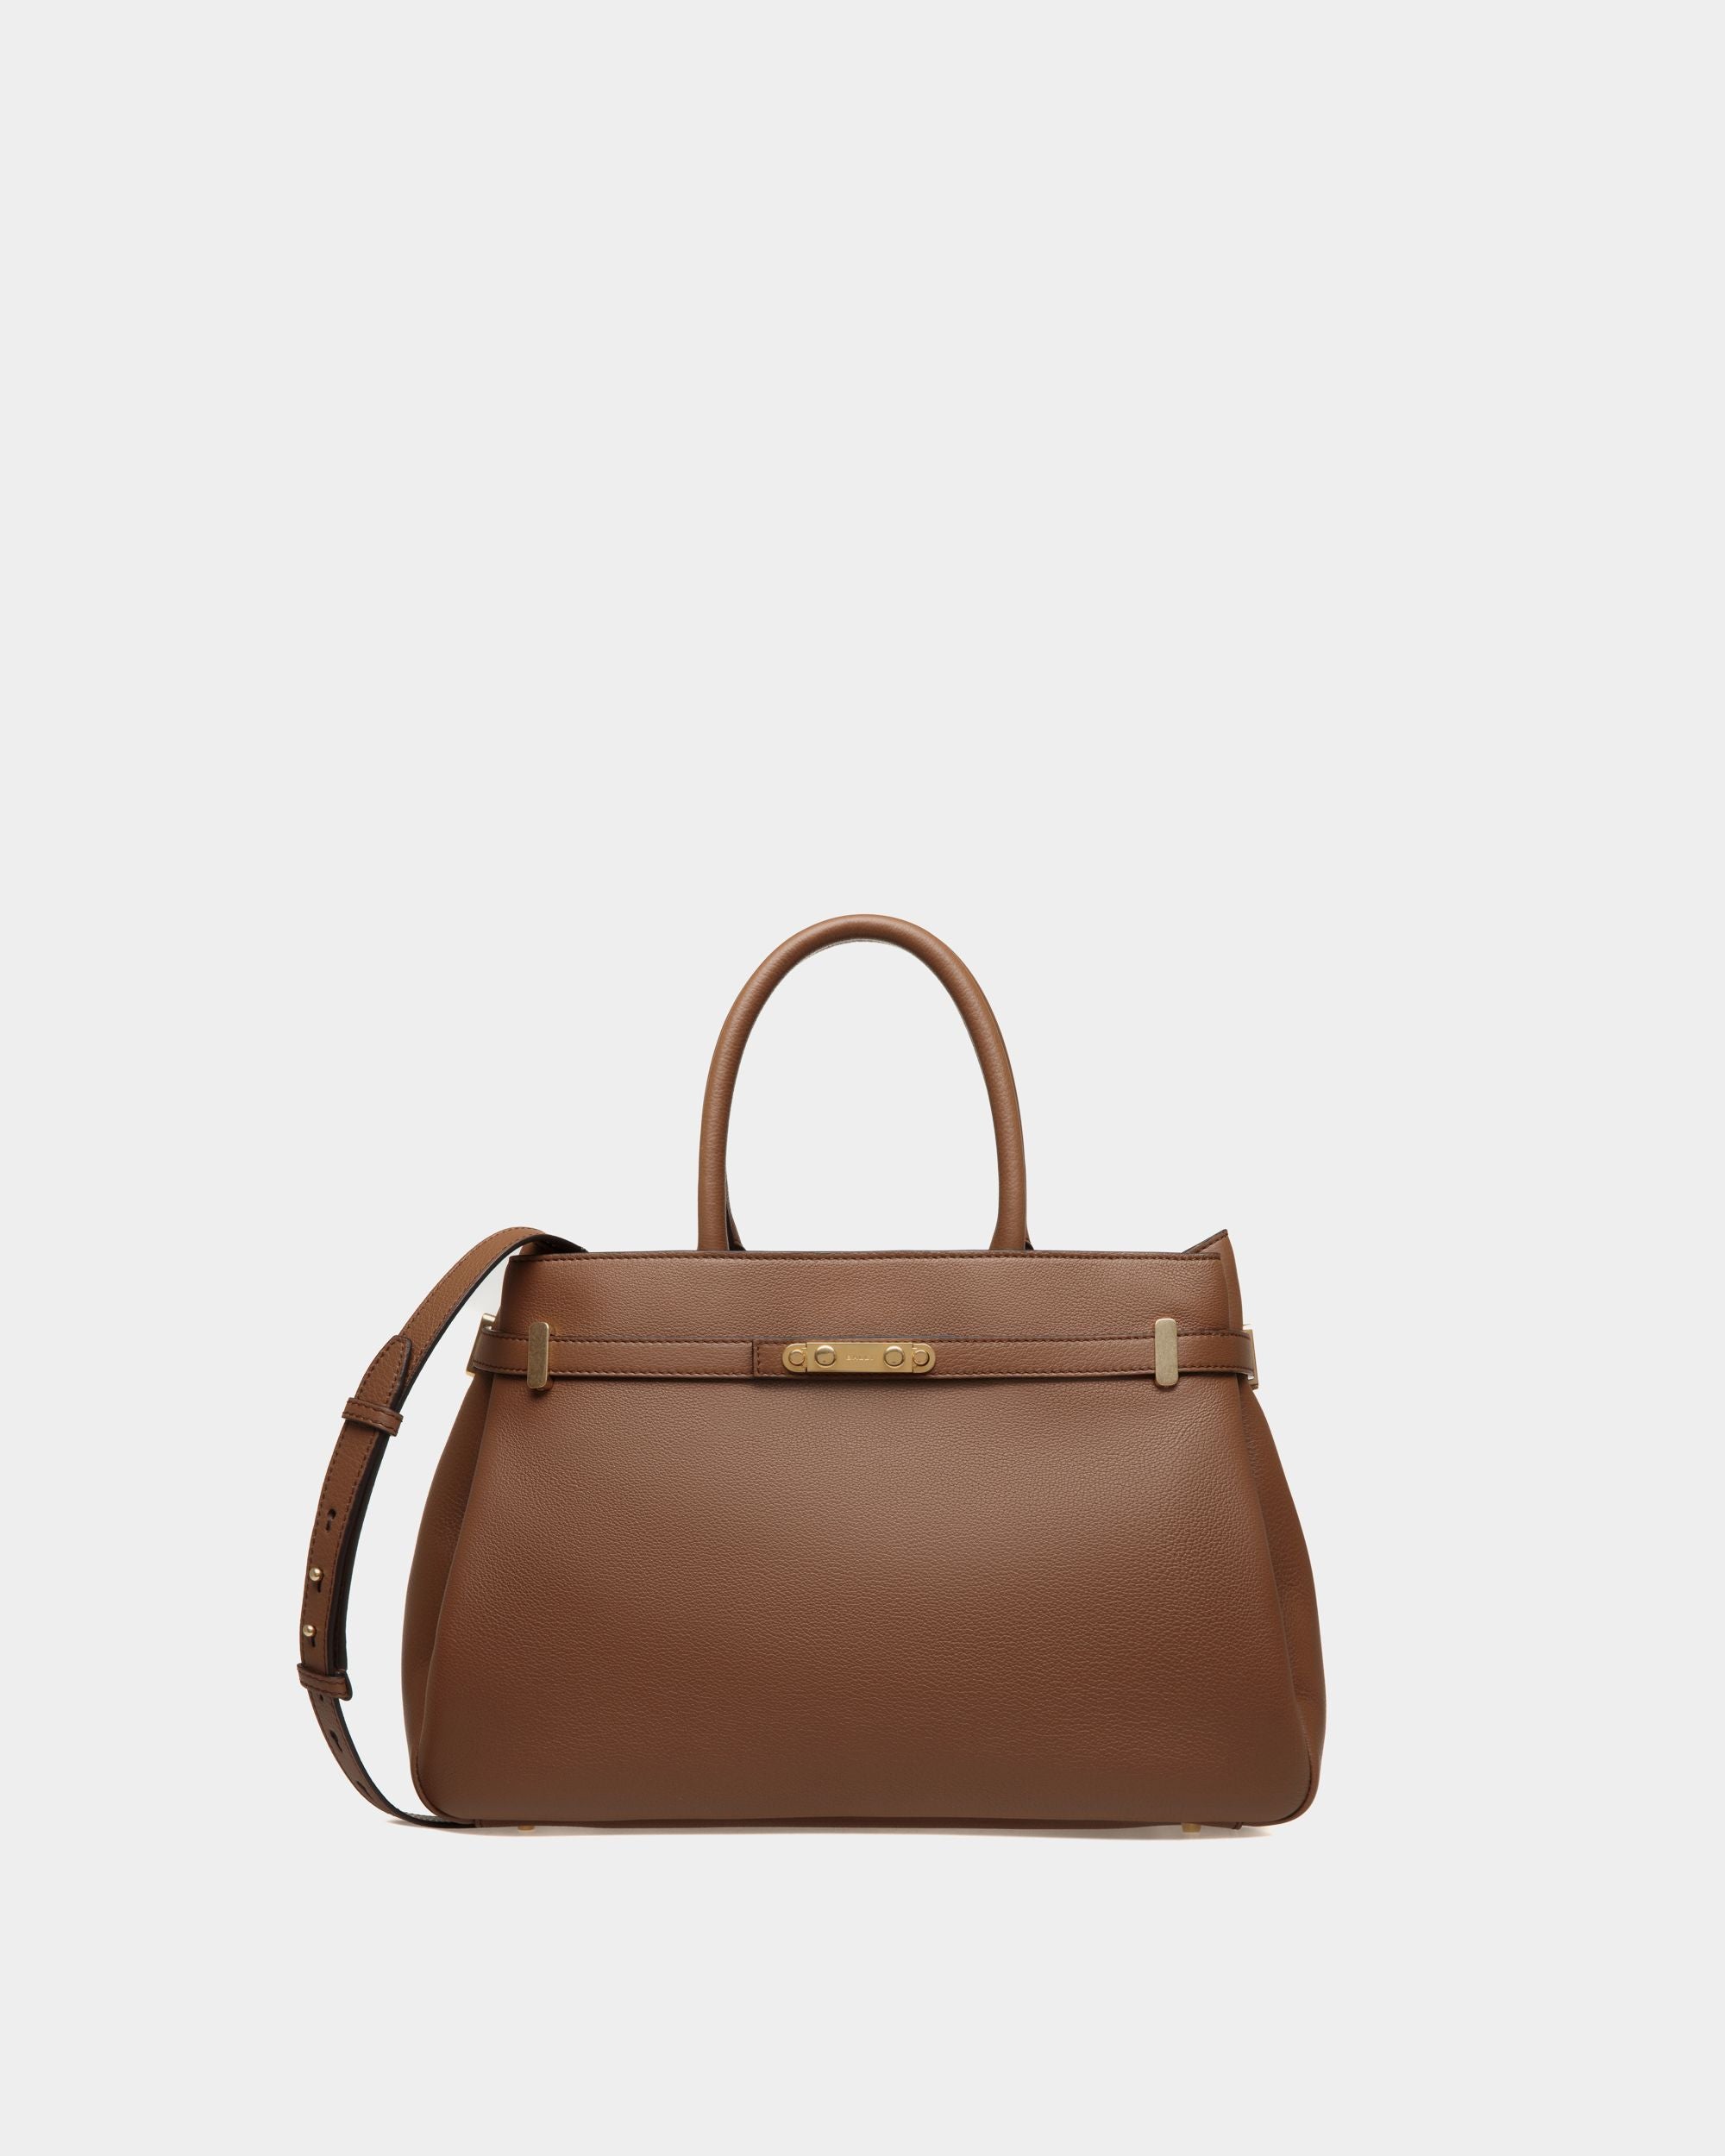 Women's Carriage Tote Bag in Brown Leather | Bally | Still Life Front